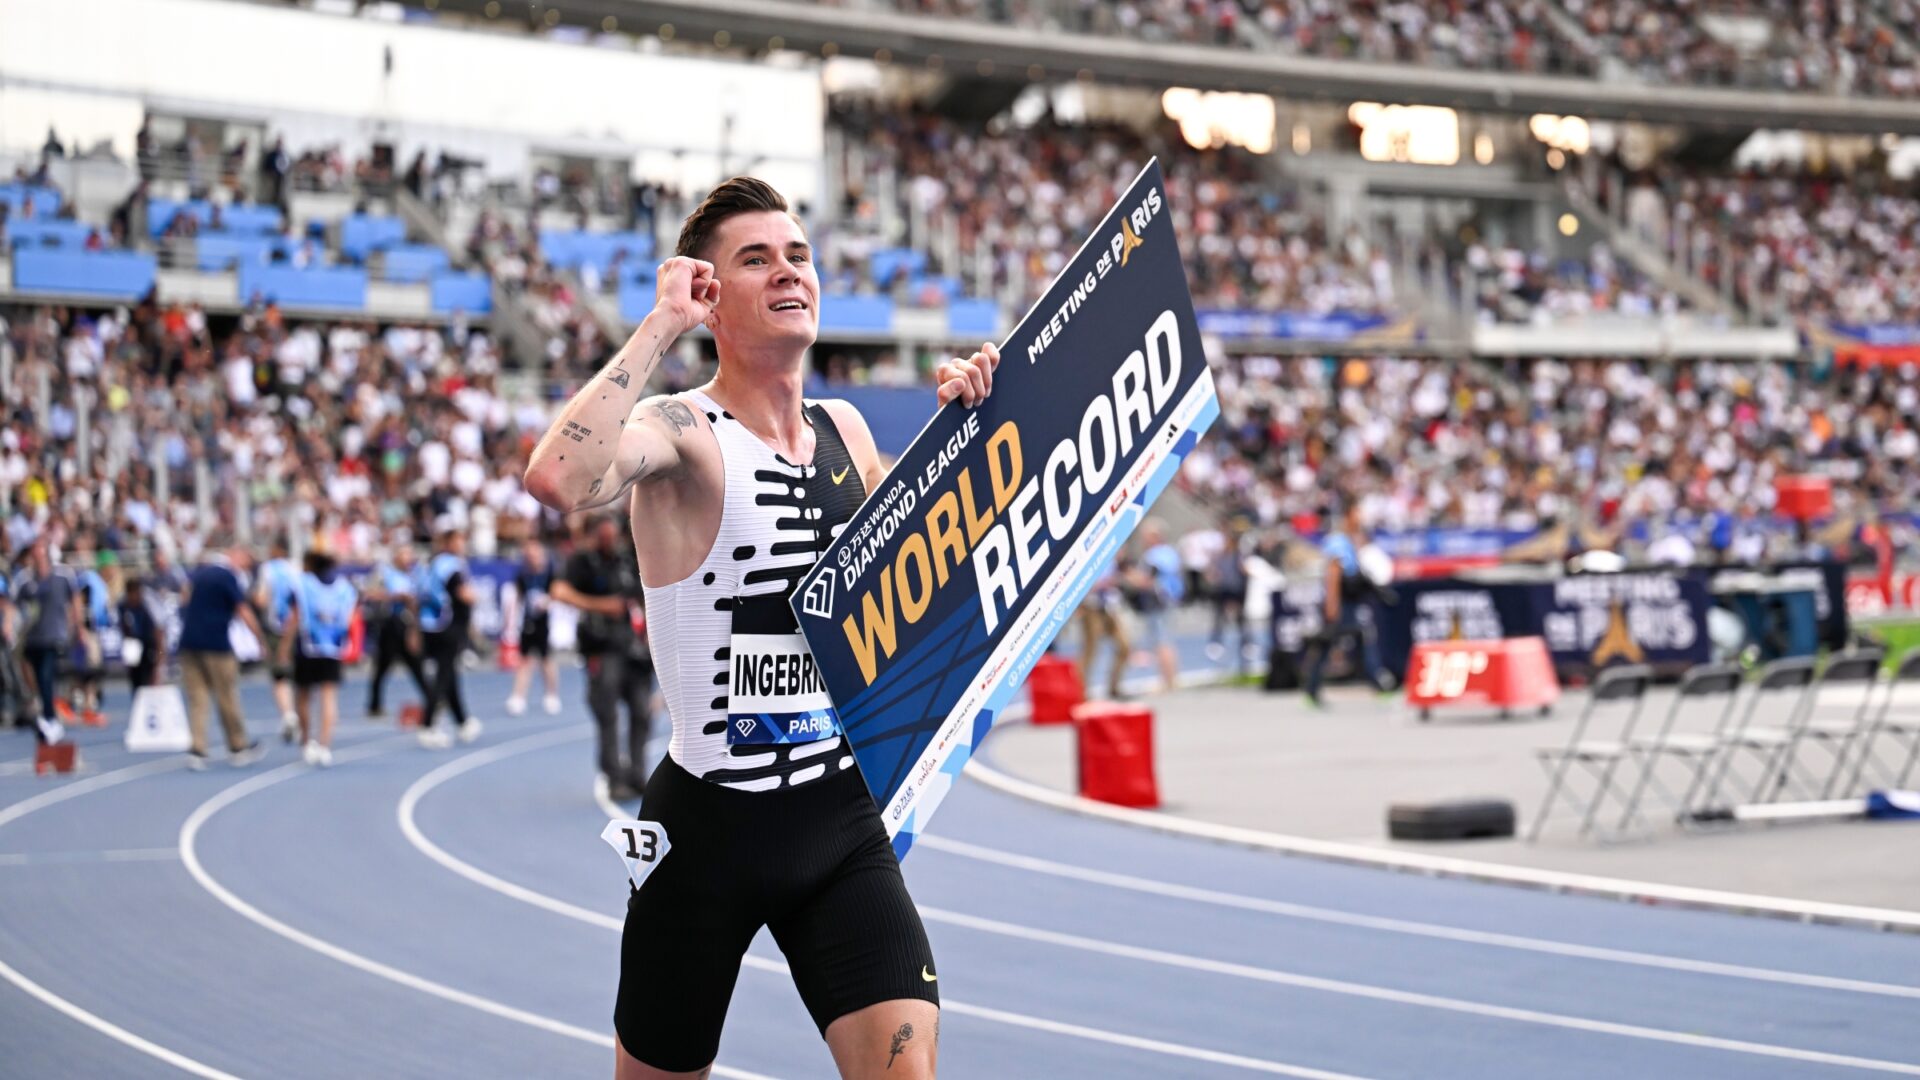 Jakob Ingebrigtsen celebrates on a running track, holding one fist in the air and displaying a "World Record" sign with the other hand.